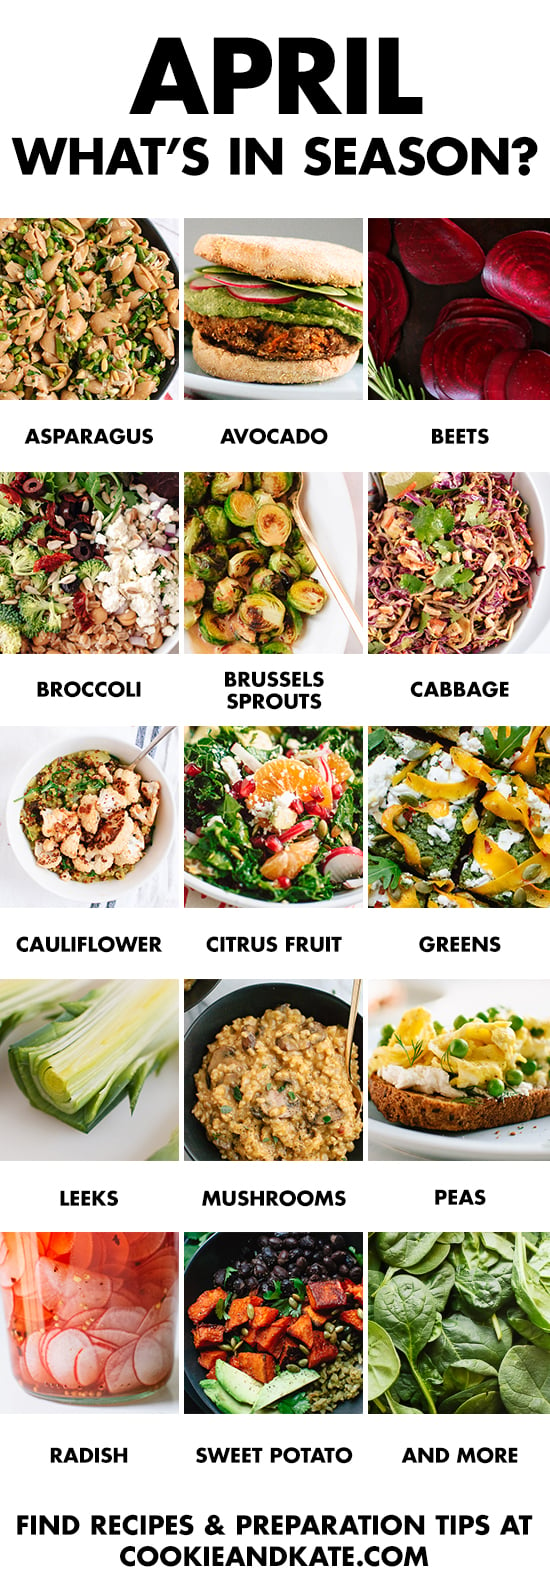 Eat seasonally with this guide to April fruits and vegetables. Find recipes and preparation tips at cookieandkate.com